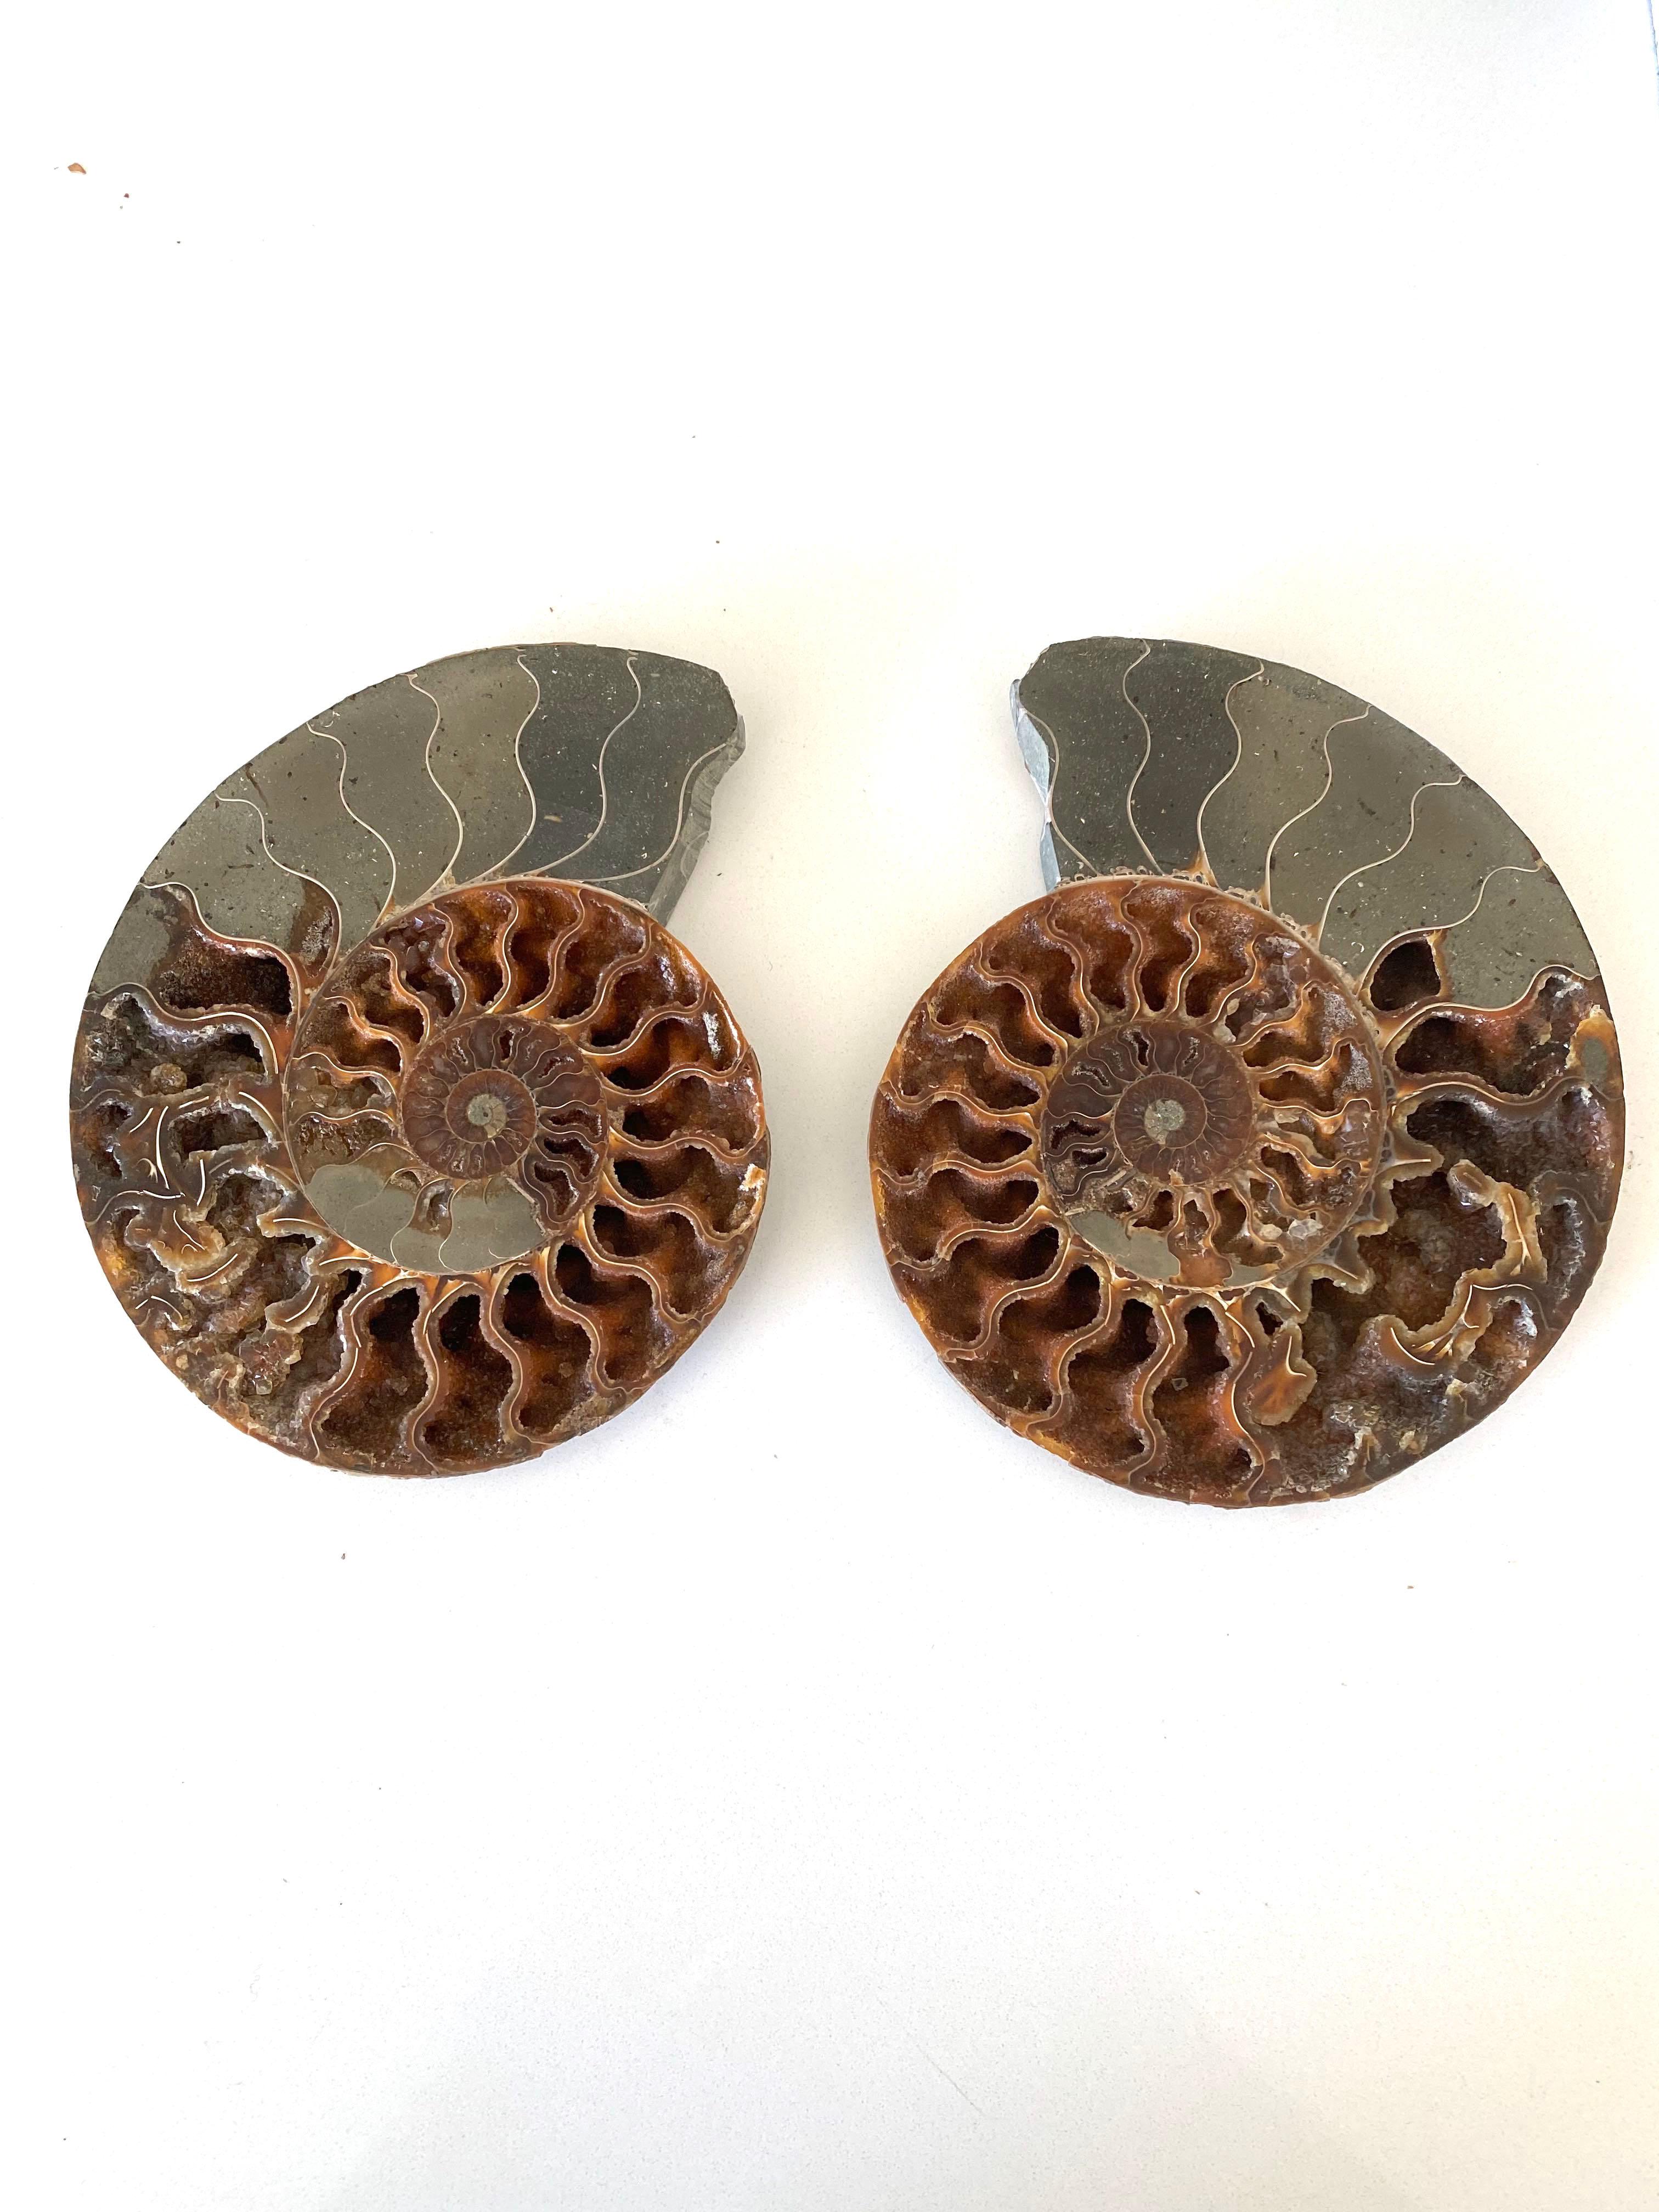 Pair polished matching set of two ammonites newly mounted on custom steel stands.
One of many from a large collection.
Varying sizes available.
One measures 8